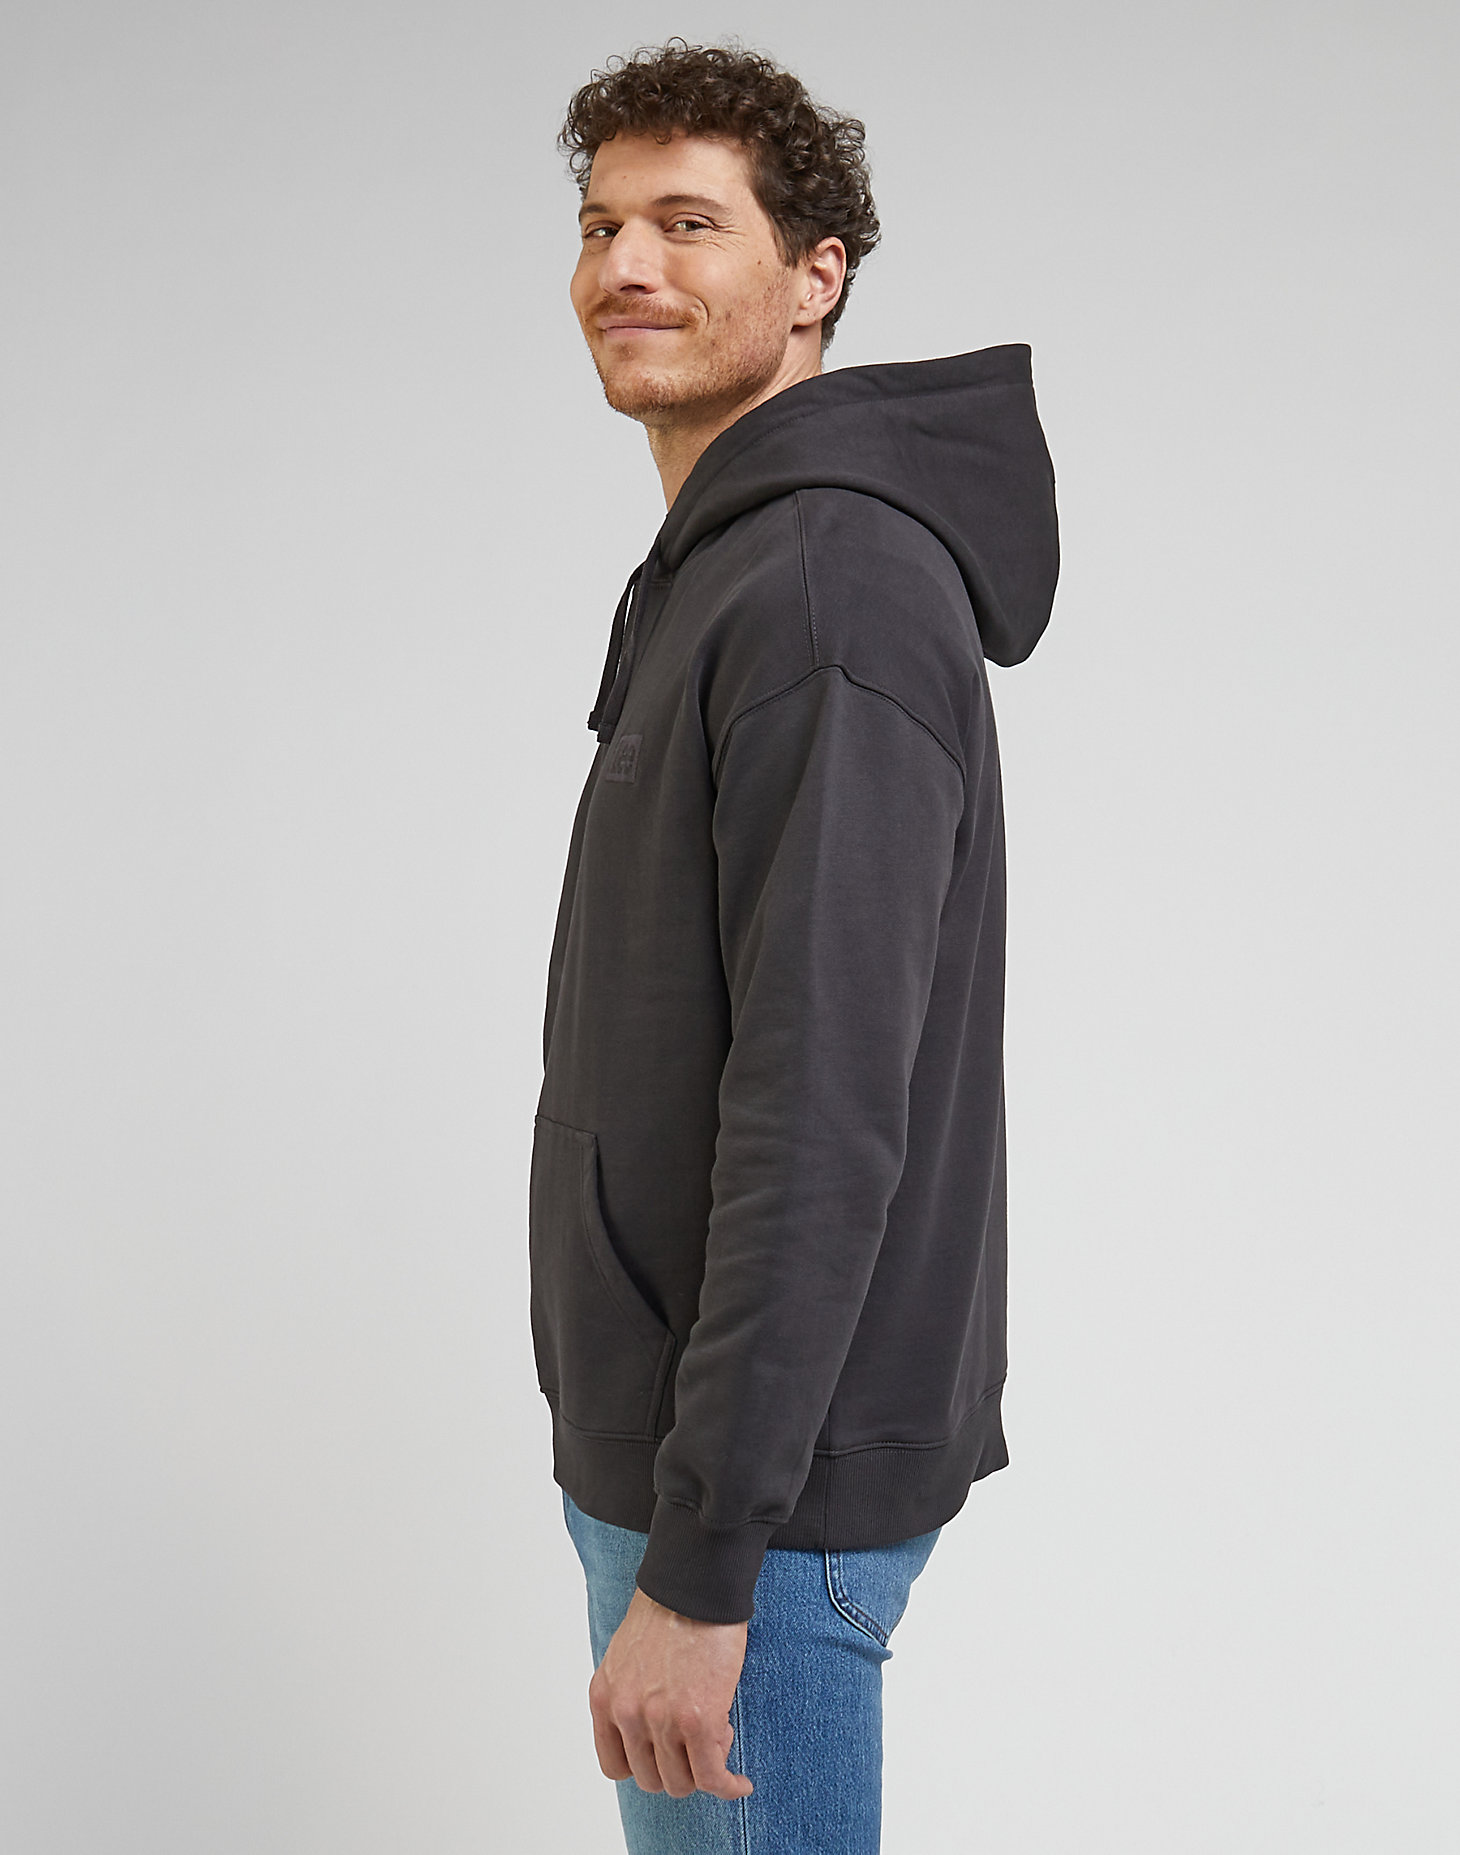 Core Loose Hoodie in Washed Black alternative view 3